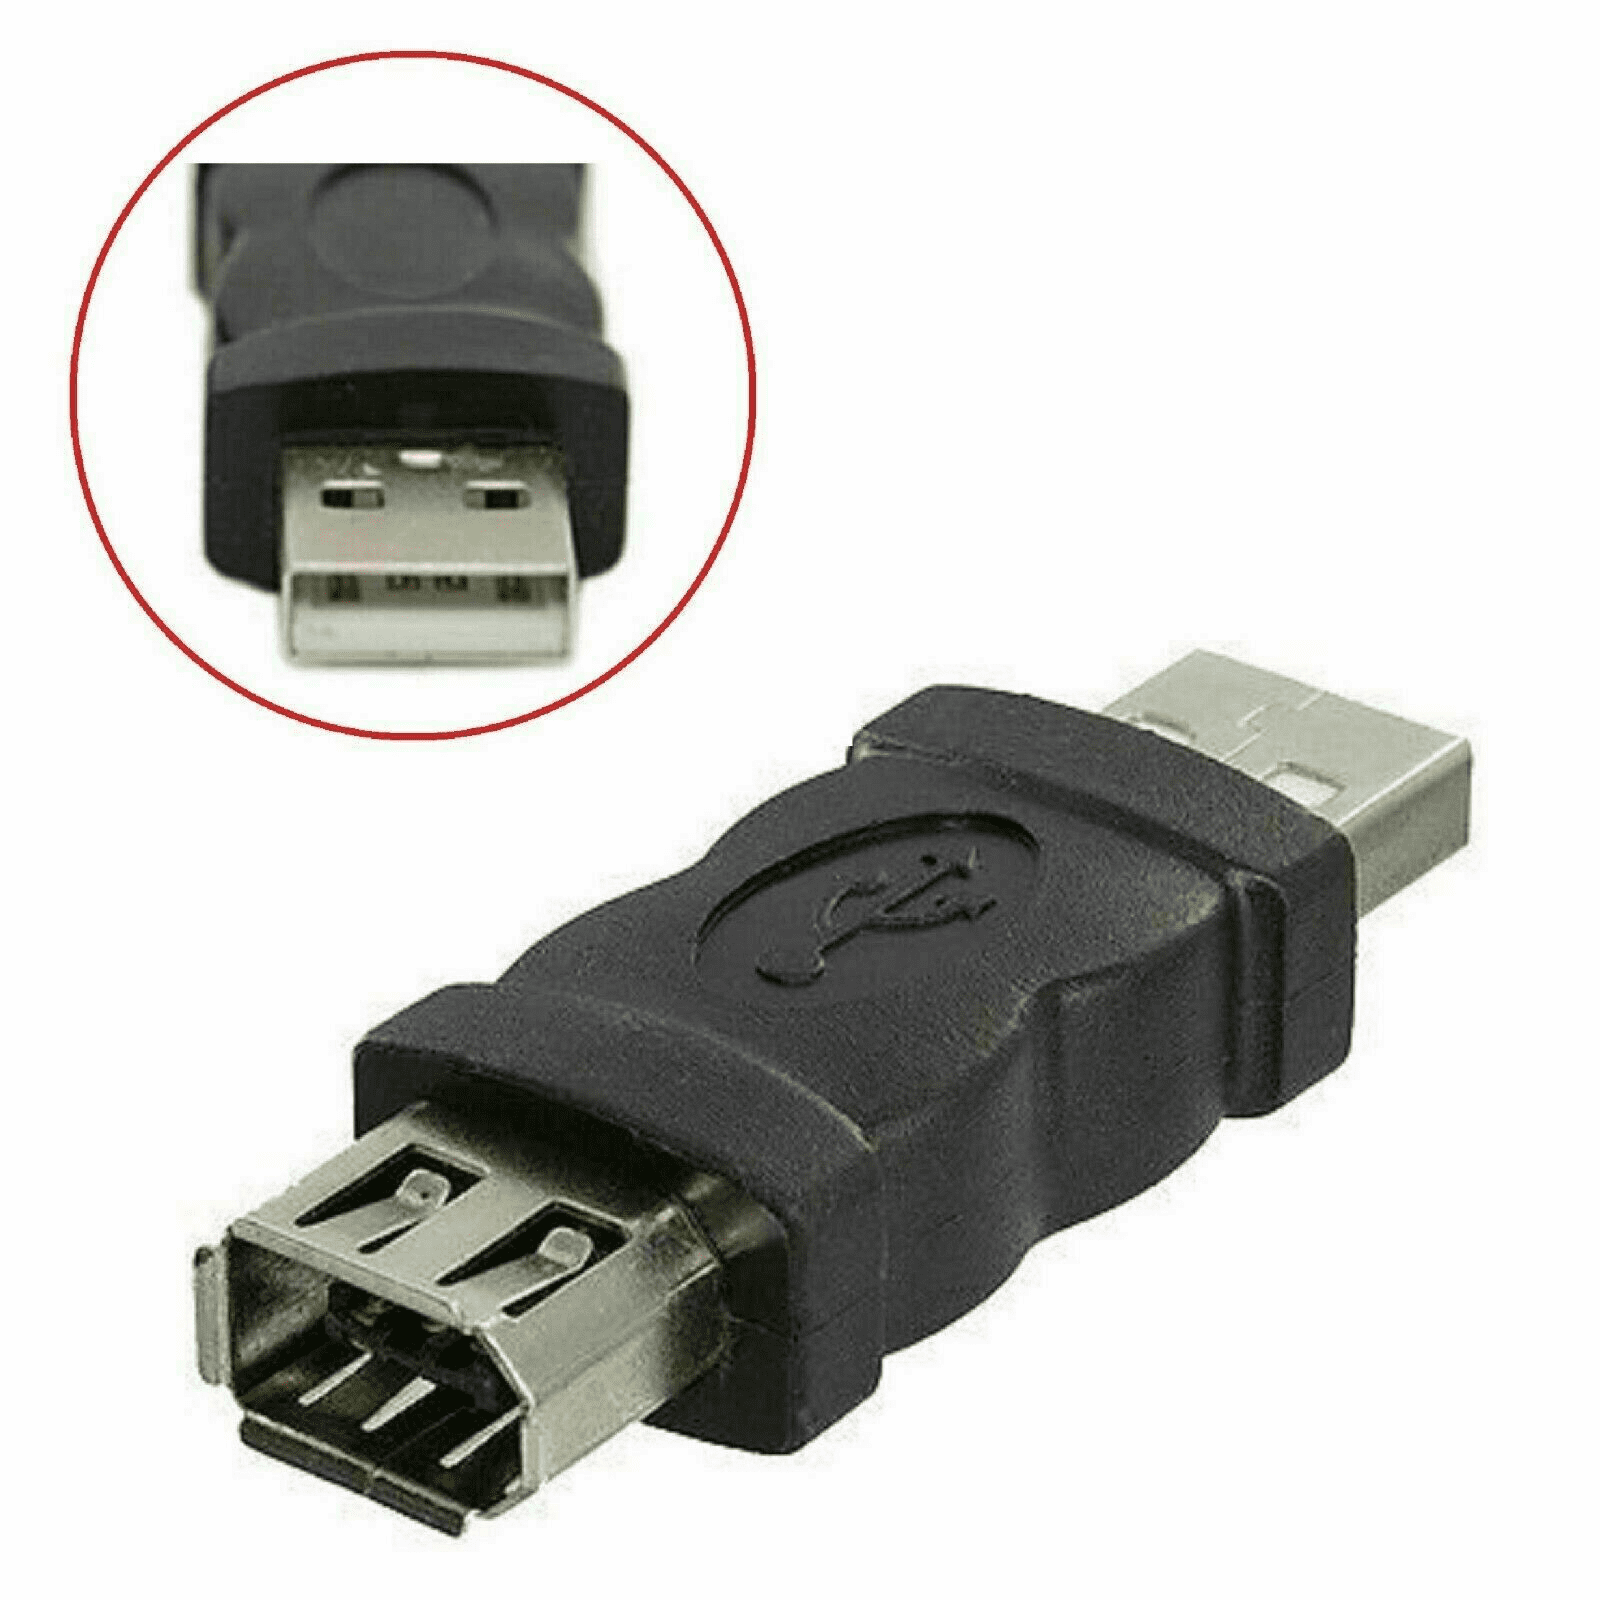 6in1 USB Adapter Travel Kit Cable to Firewire IEEE 1394 6 Adapters A/b New 